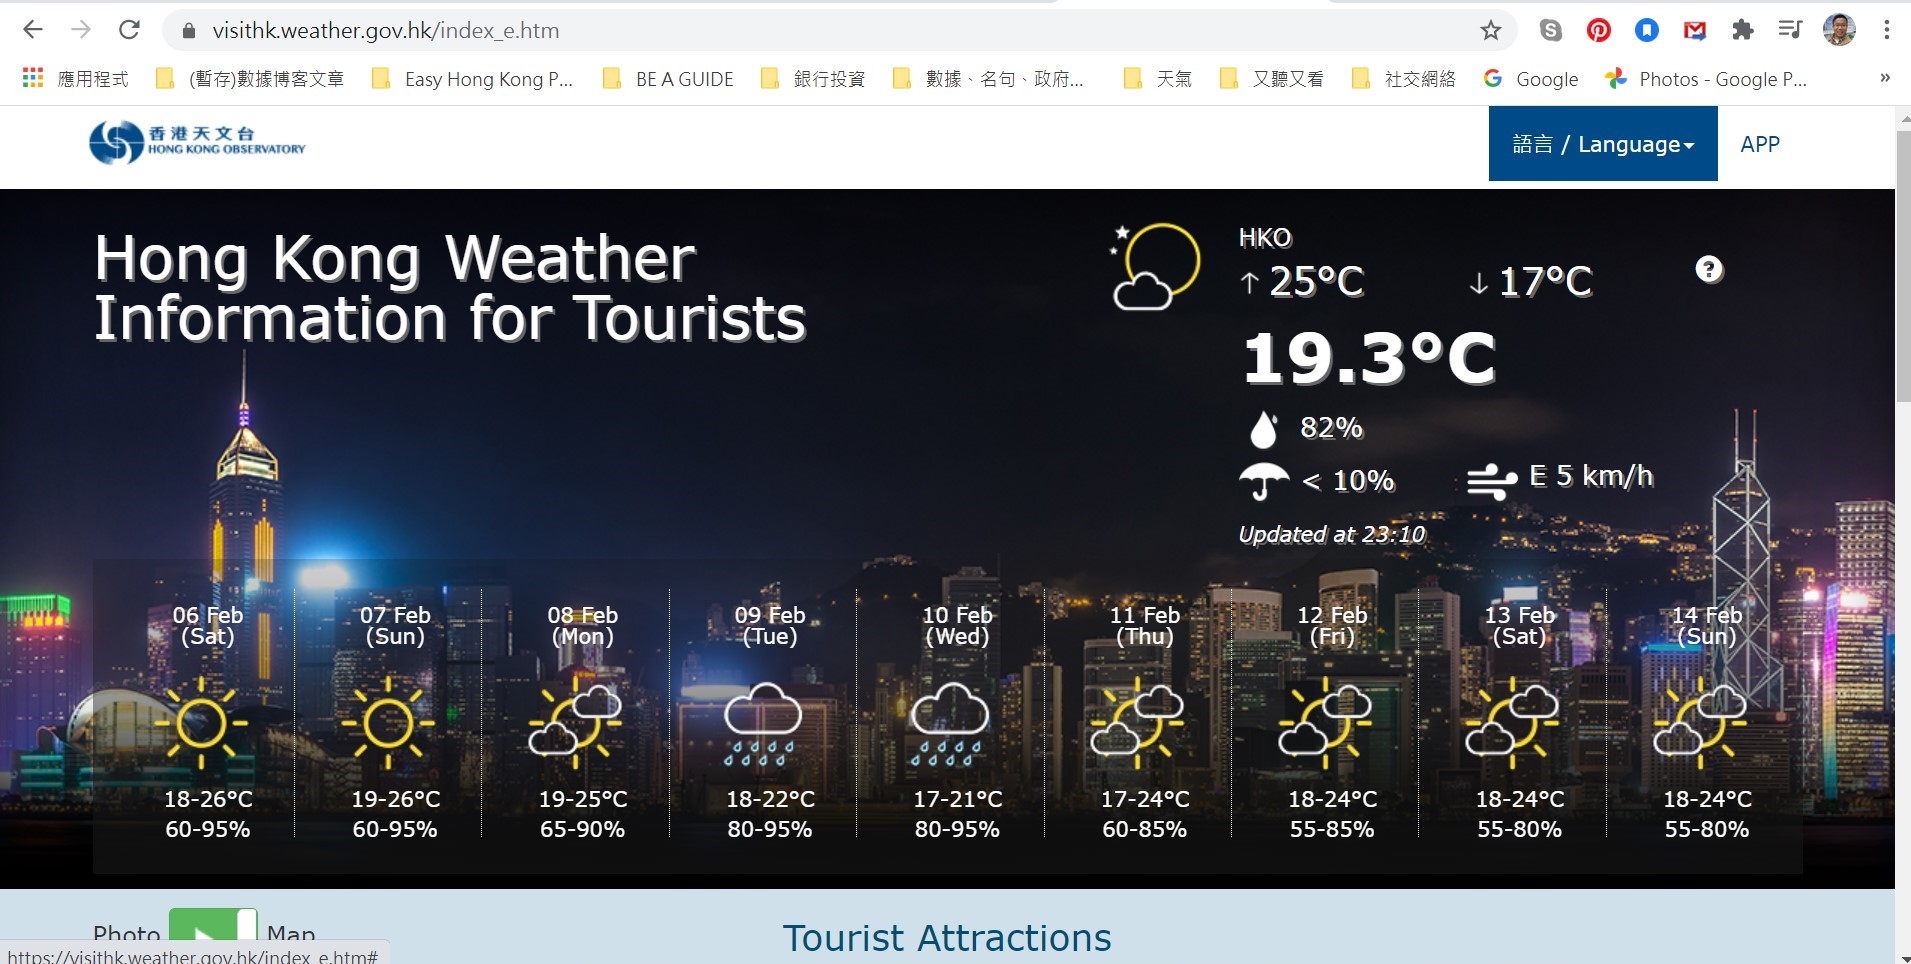 Check Hong Kong weather information for tourists before TIY, tour Hong Kong yourselves